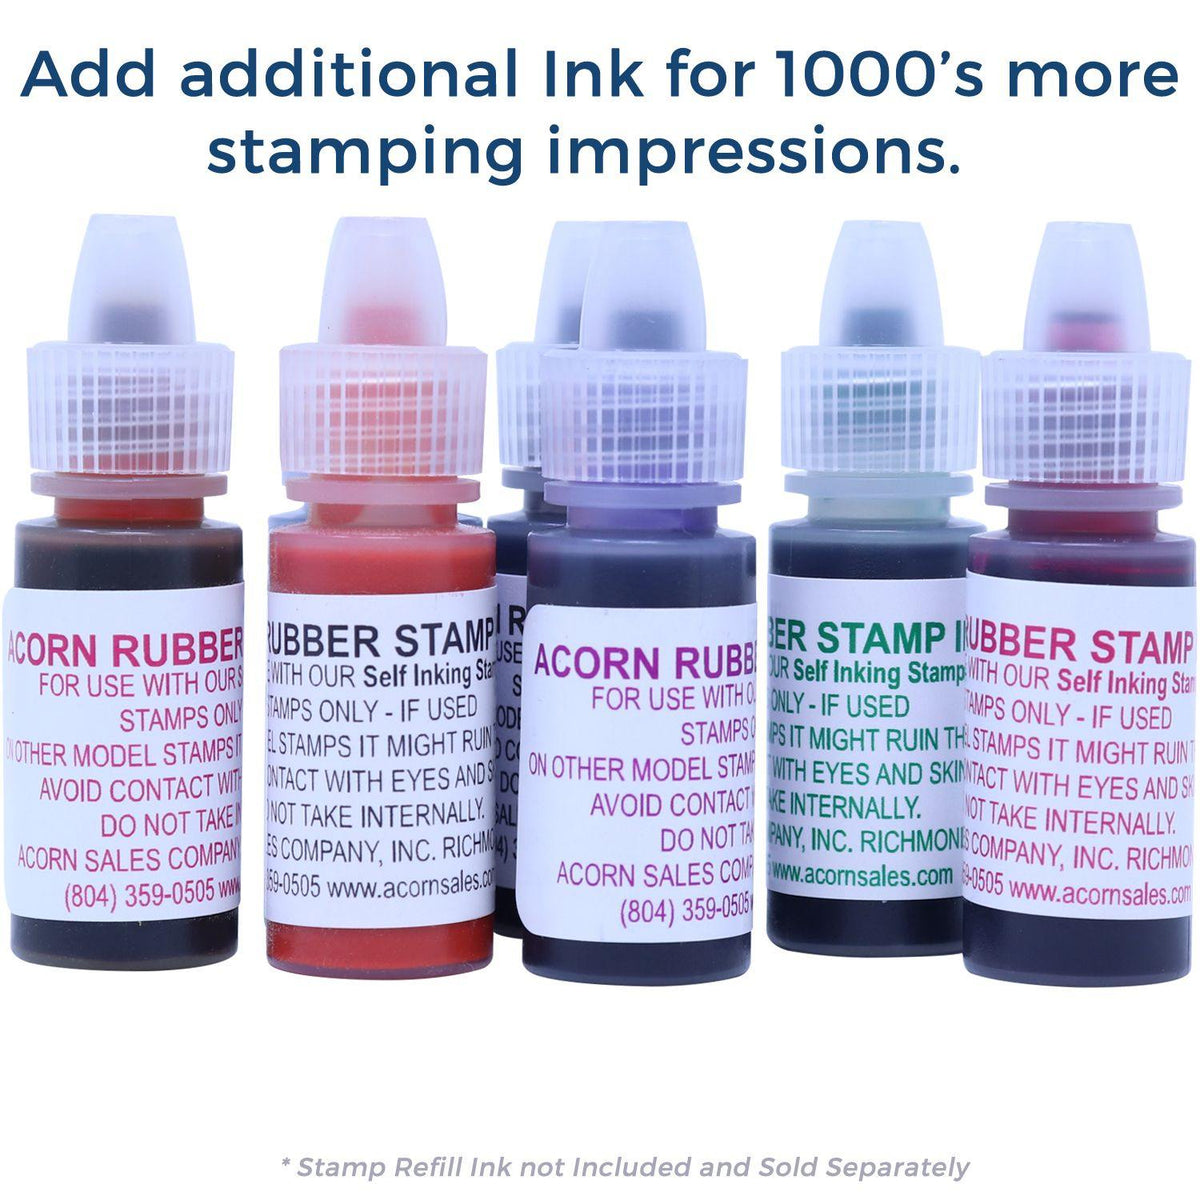 Refill Inks for Large Pre-Inked Classified Stamp Available